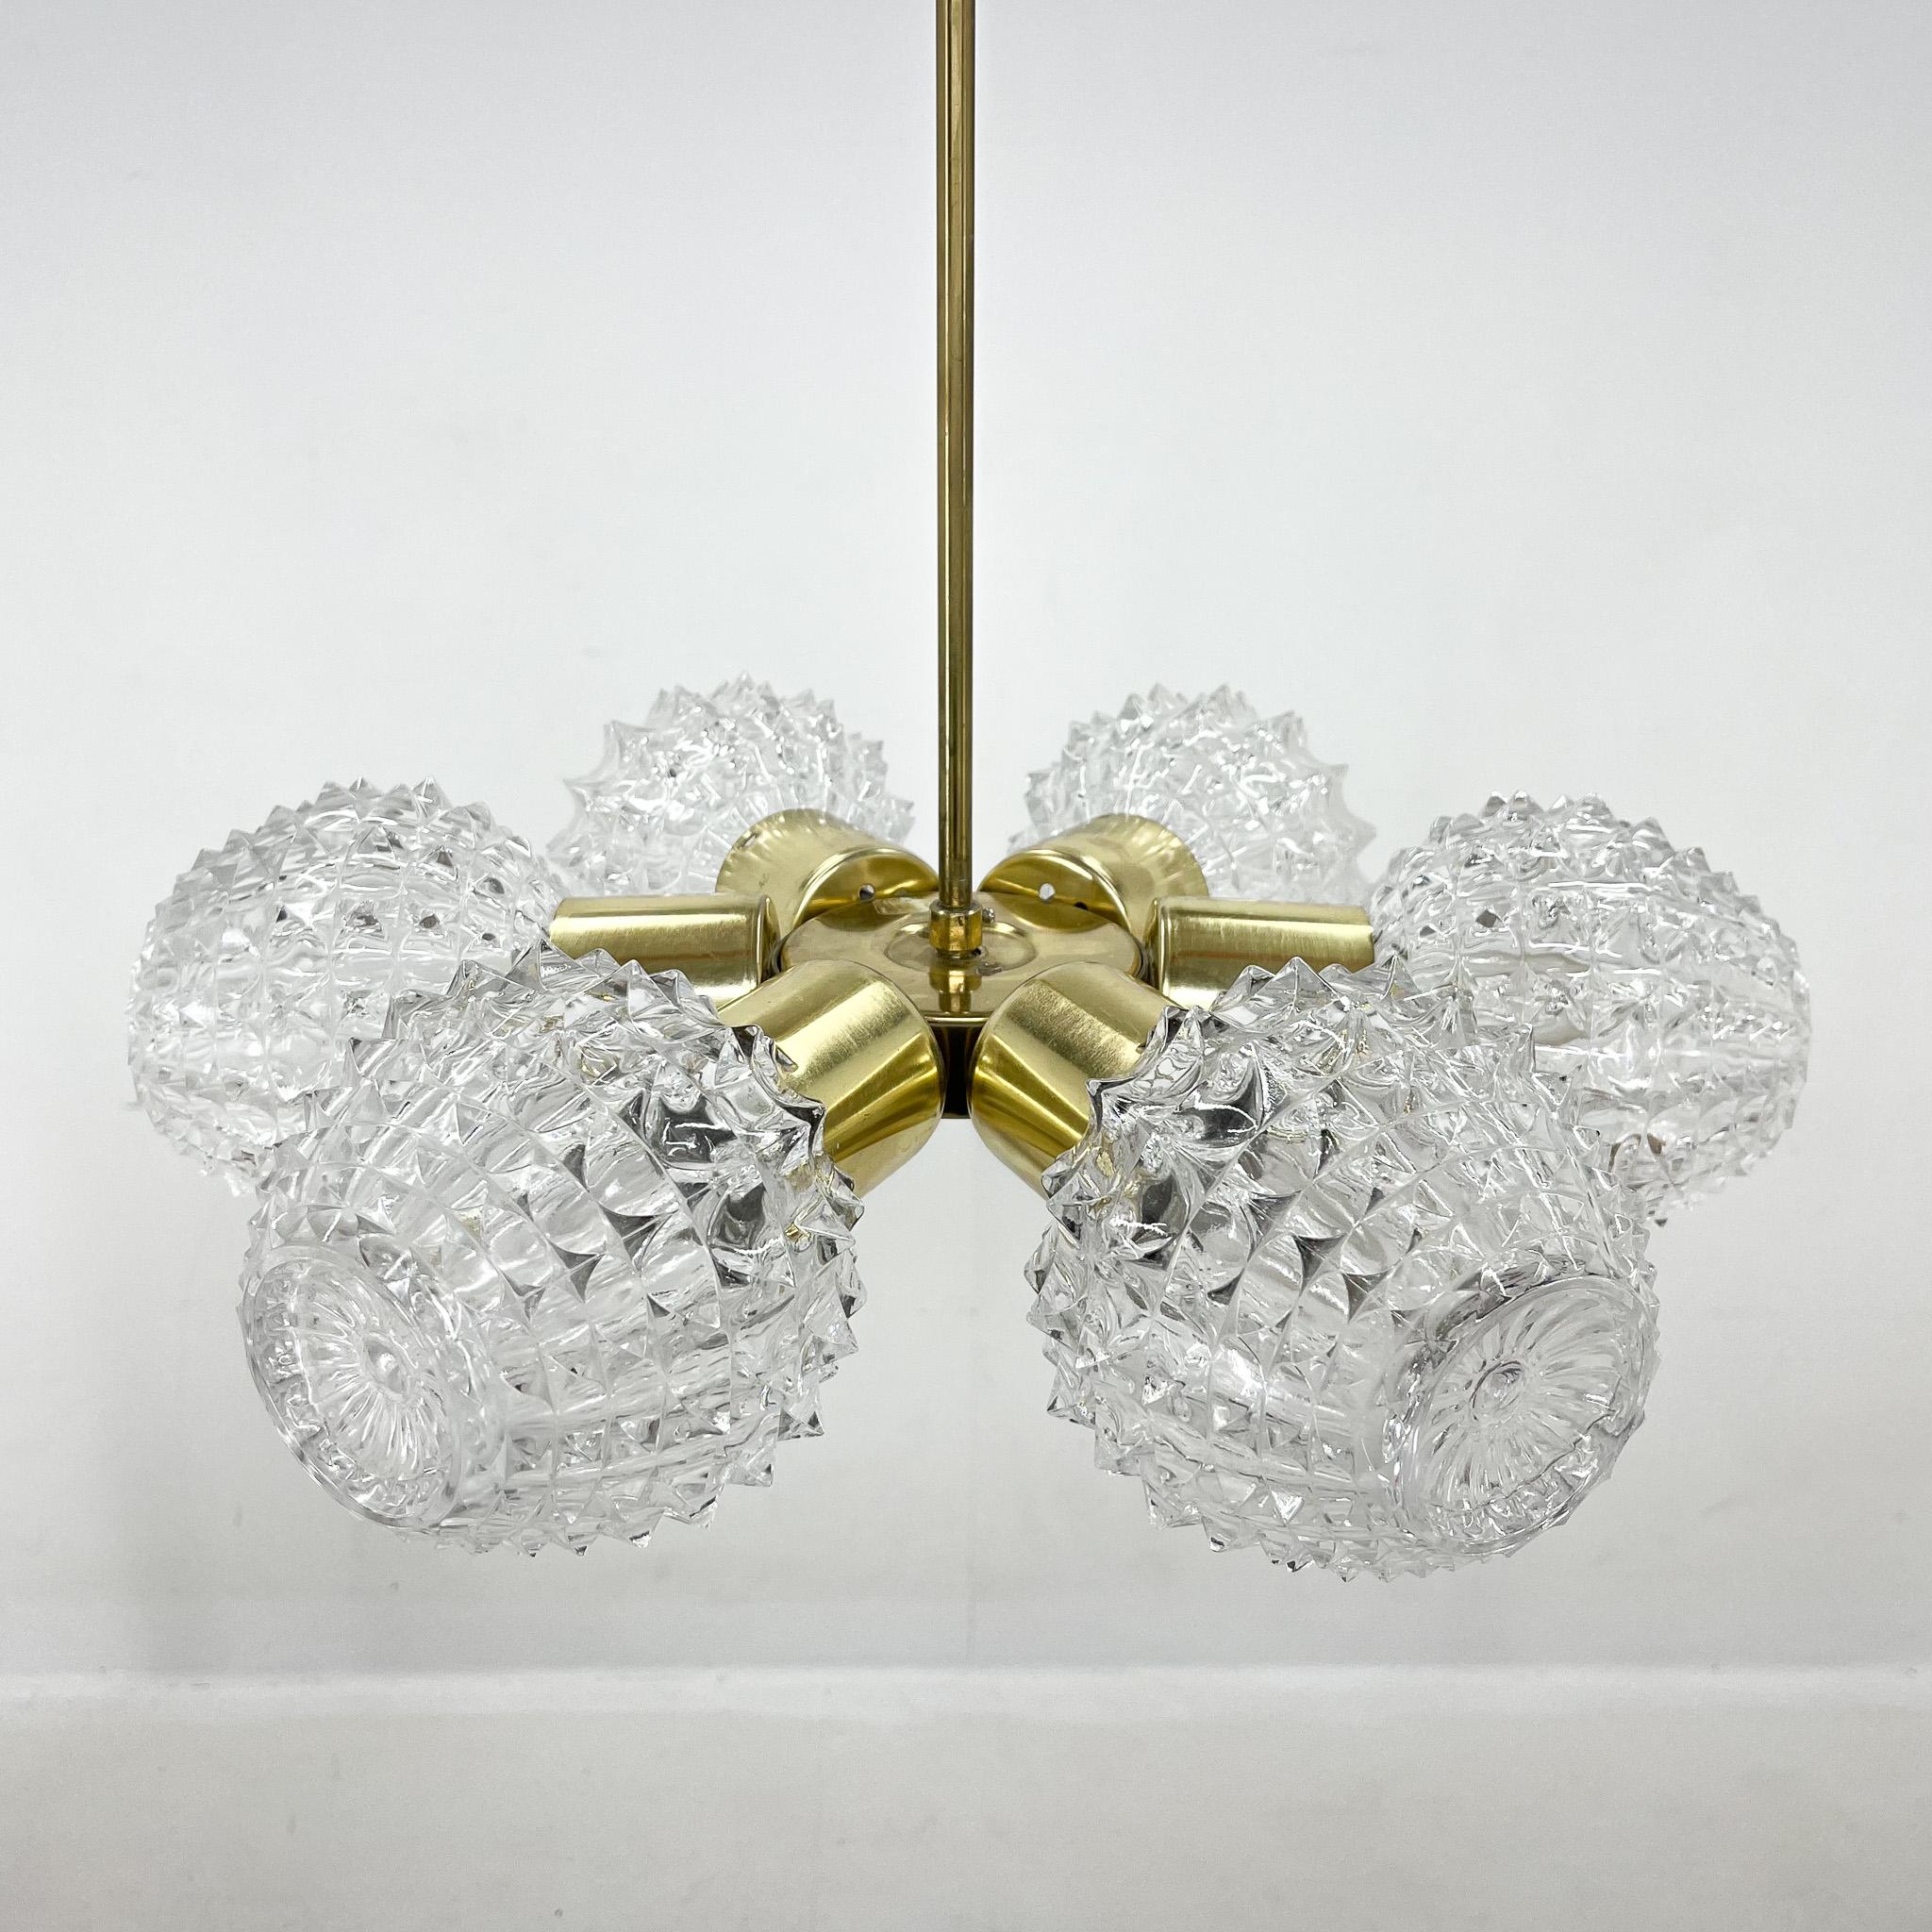 1960s Brass & Glass Chandelier by Kamenicky Senov, 2 Pieces Available In Good Condition For Sale In Praha, CZ